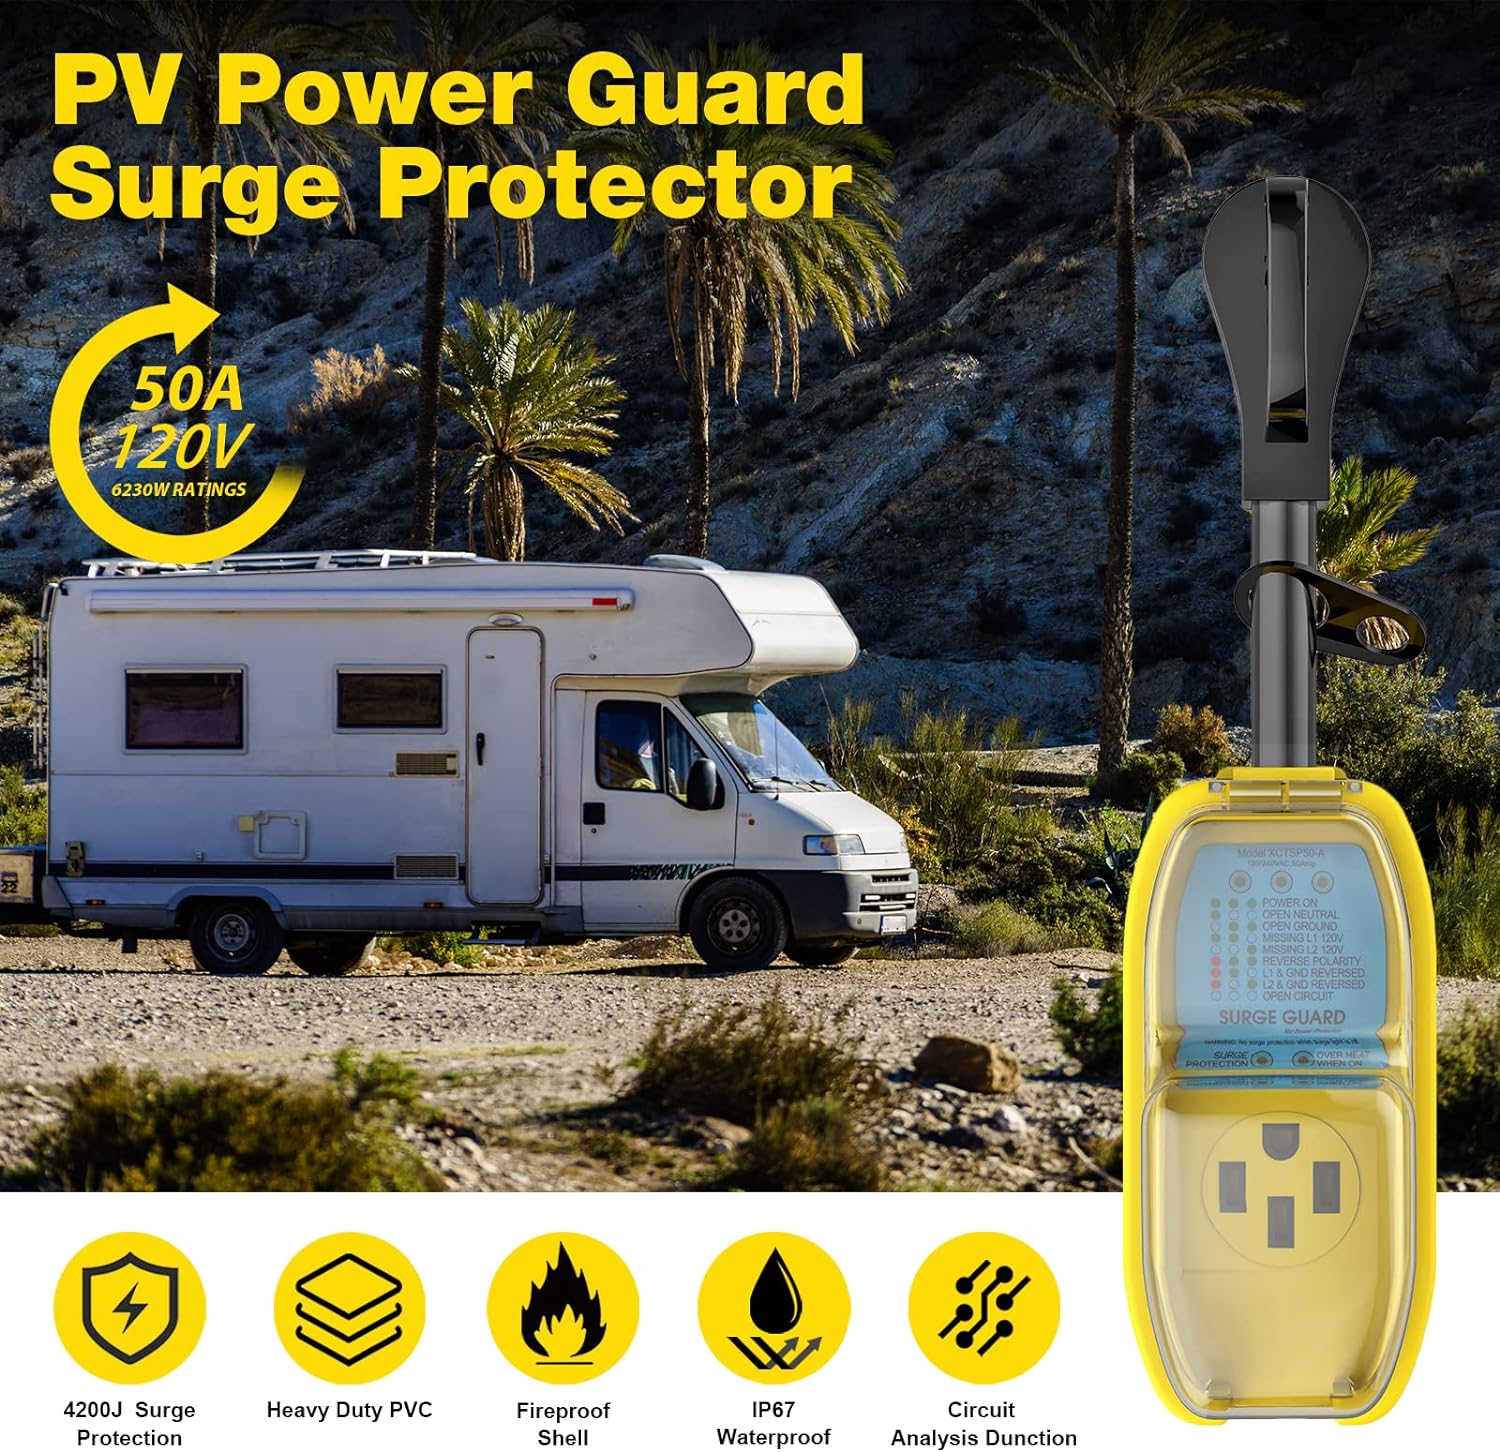 RV Surge Protector 50 Amp - RV must have